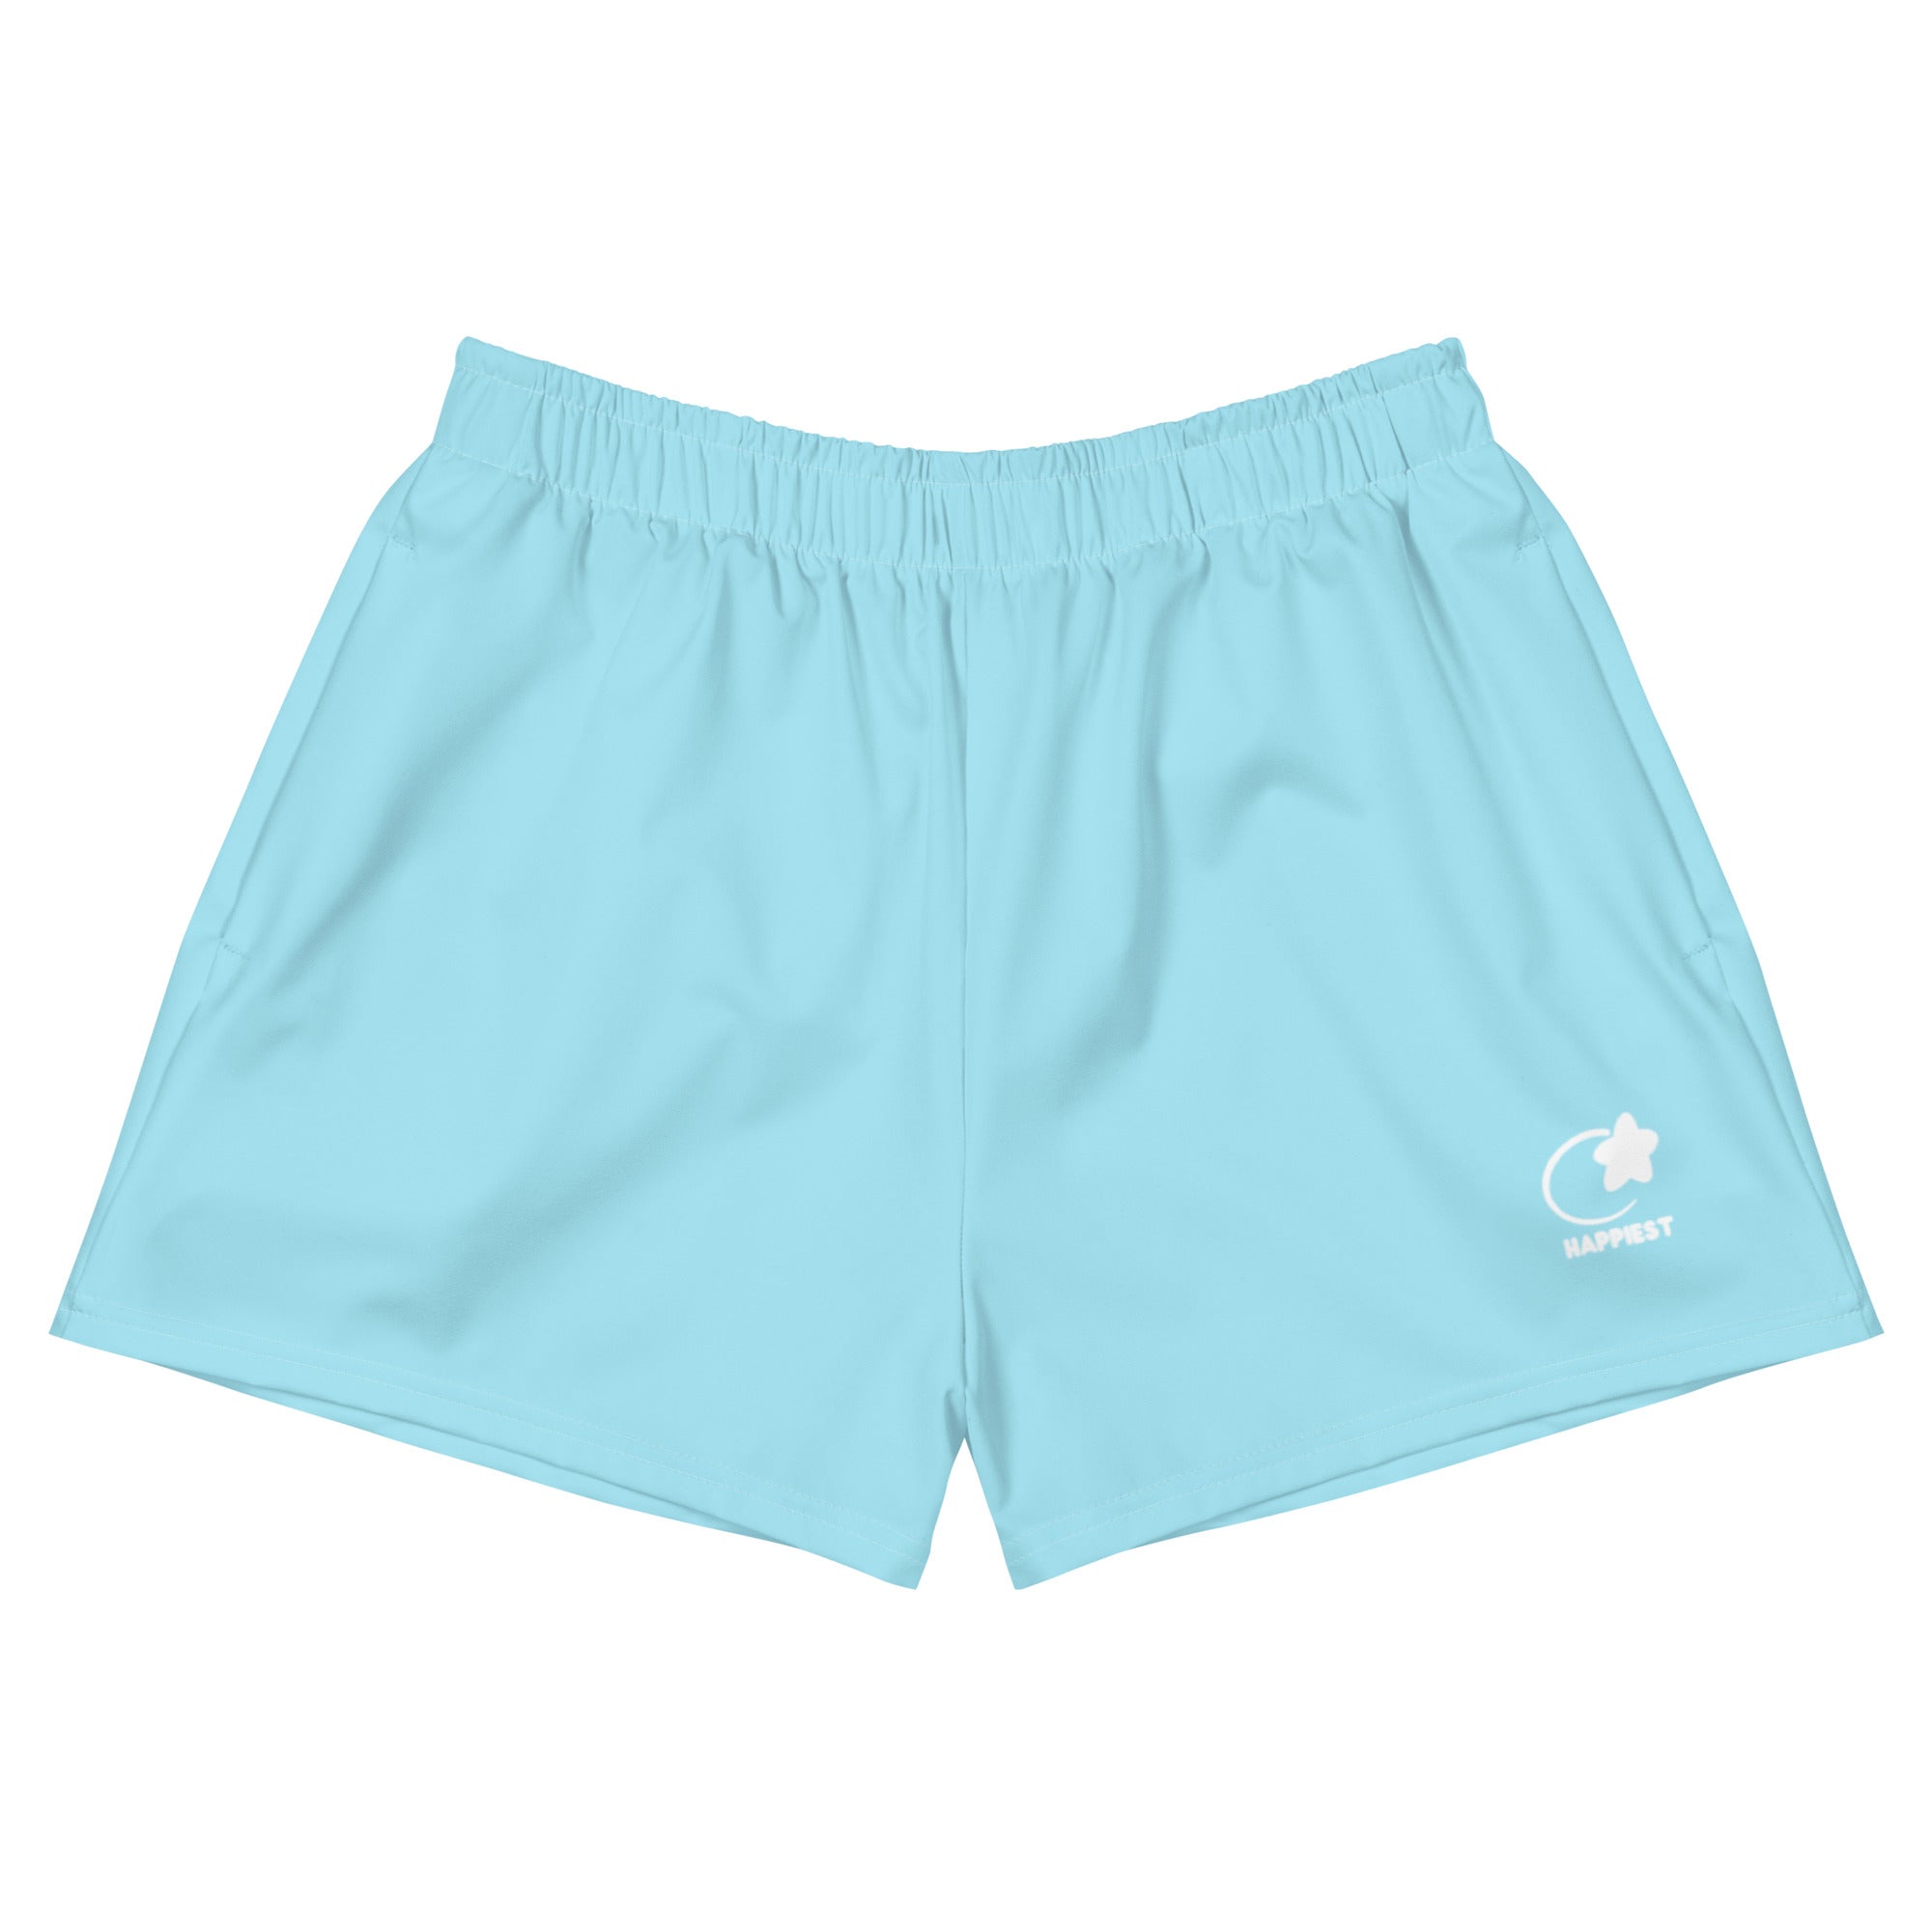 Bluebell Women’s Recycled Athletic Shorts